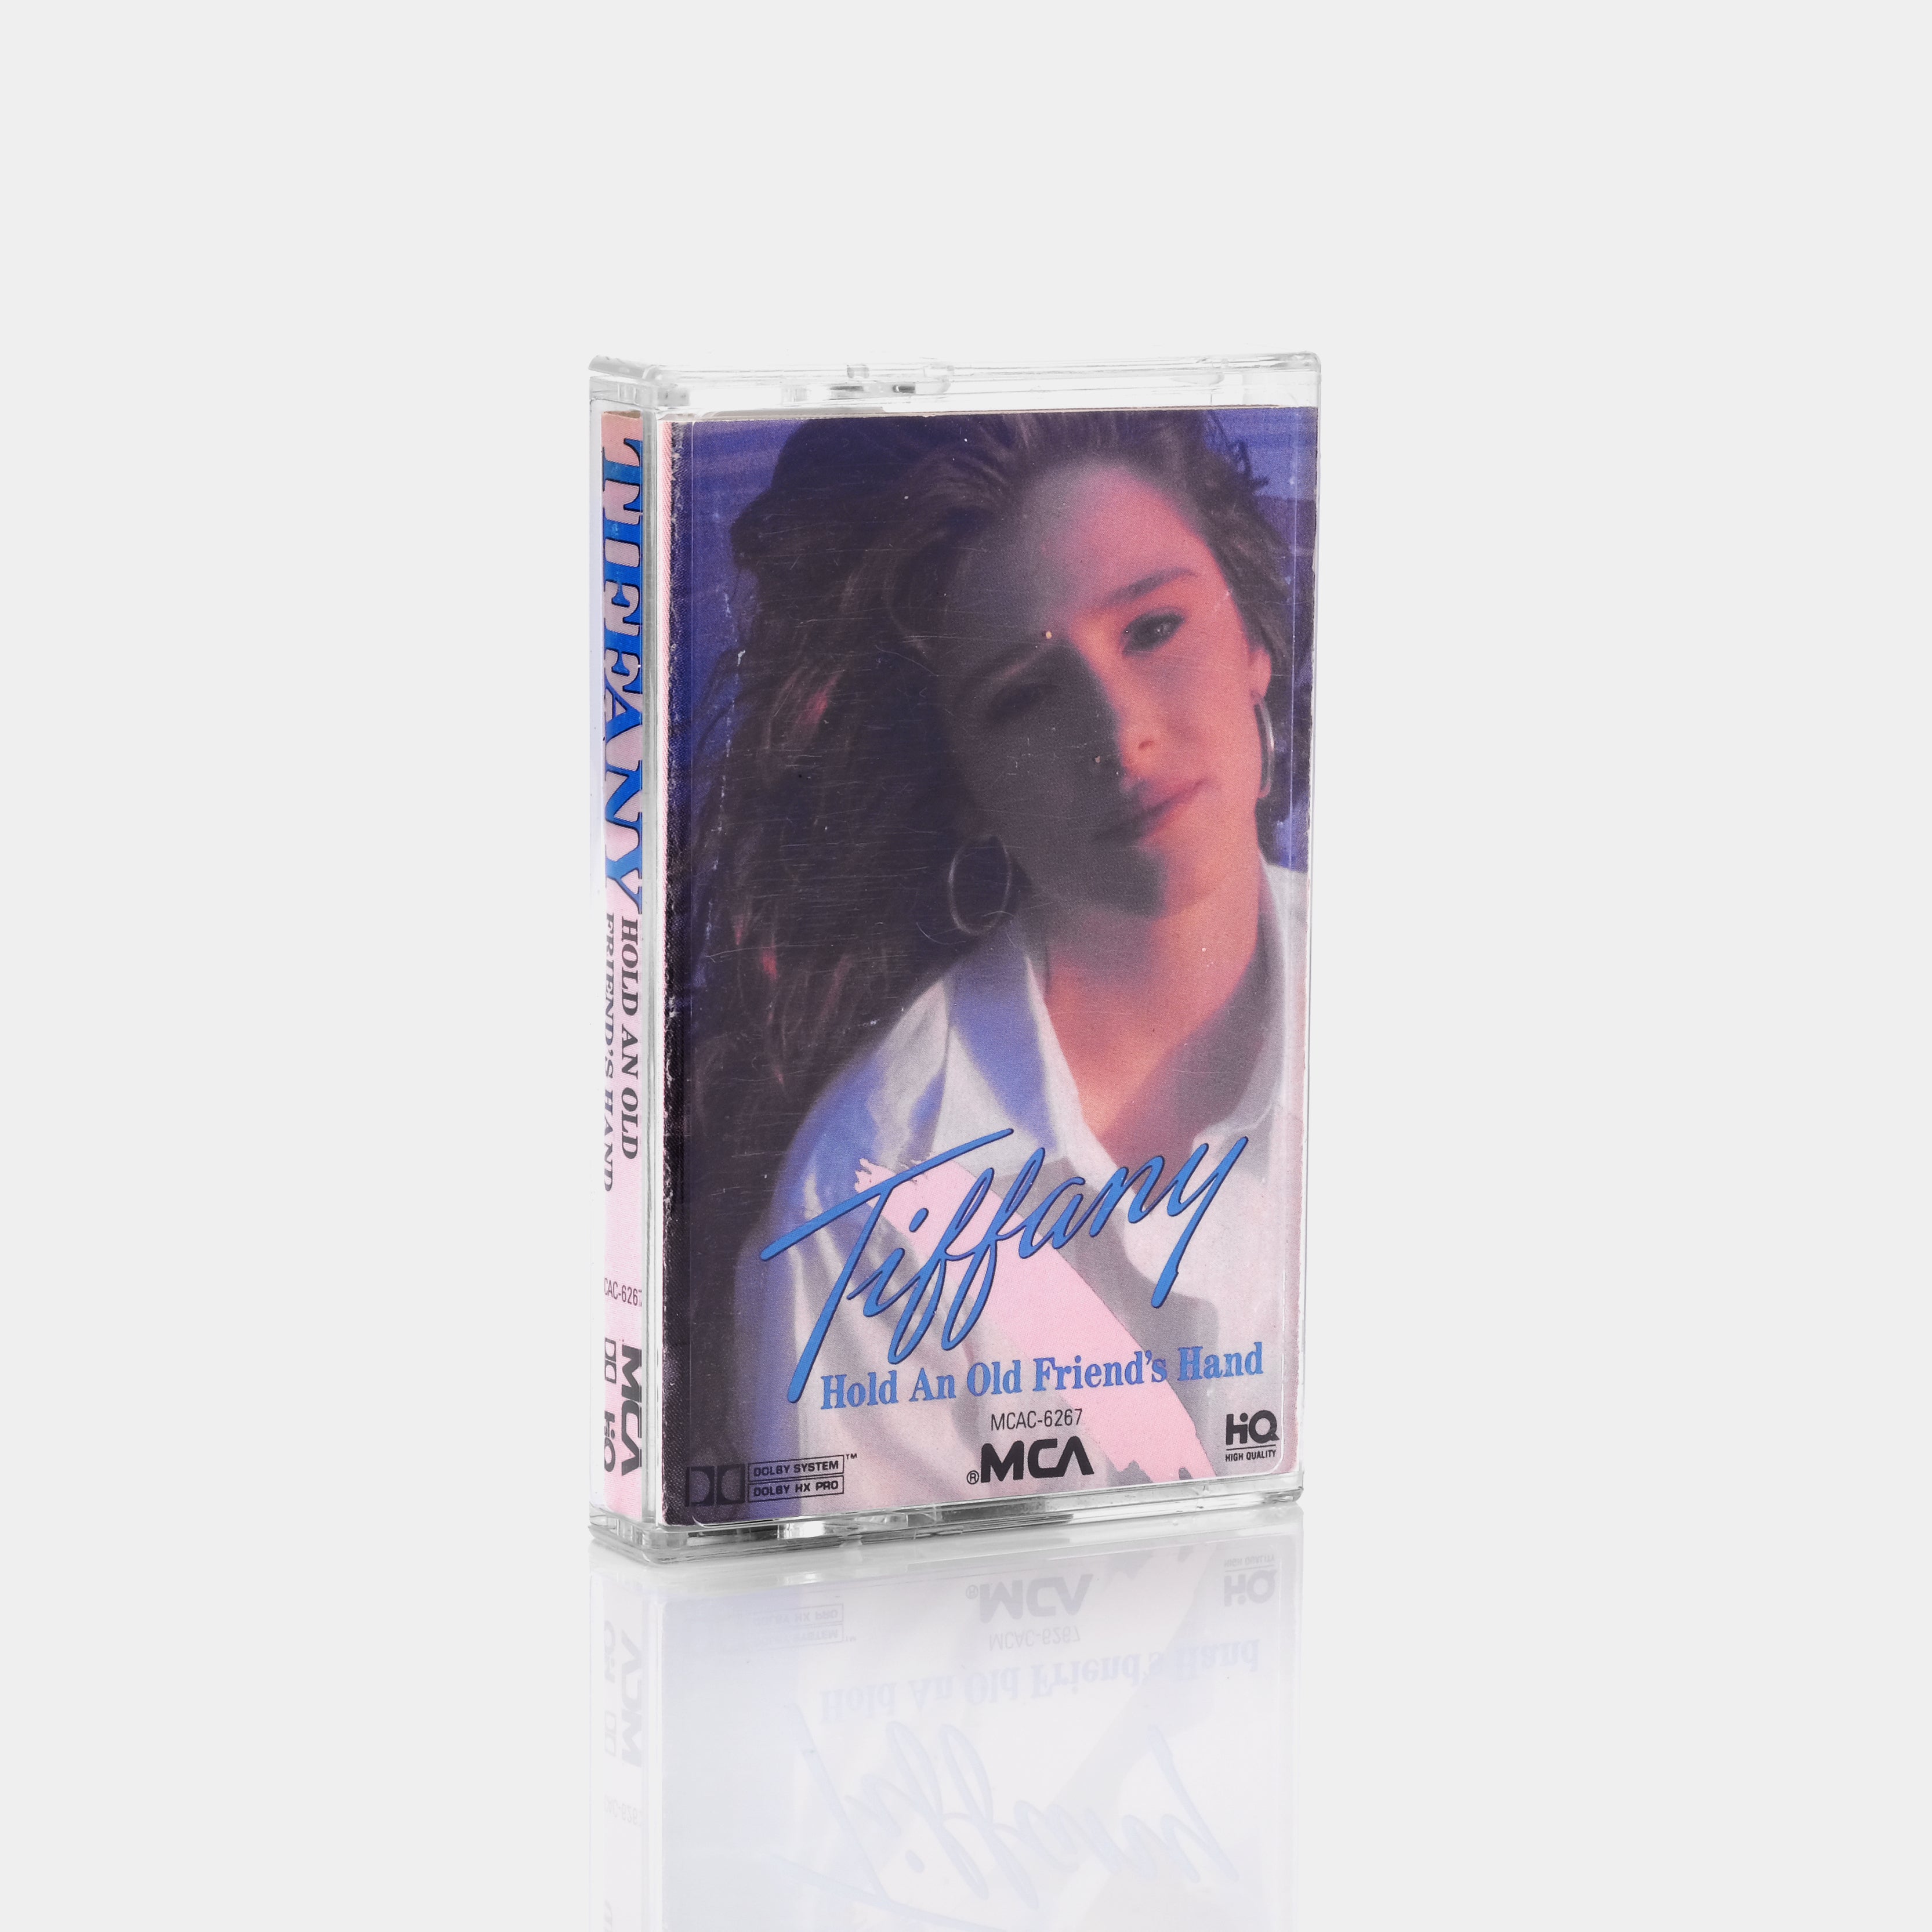 Tiffany - Hold An Old Friend's Hand Cassette Tape